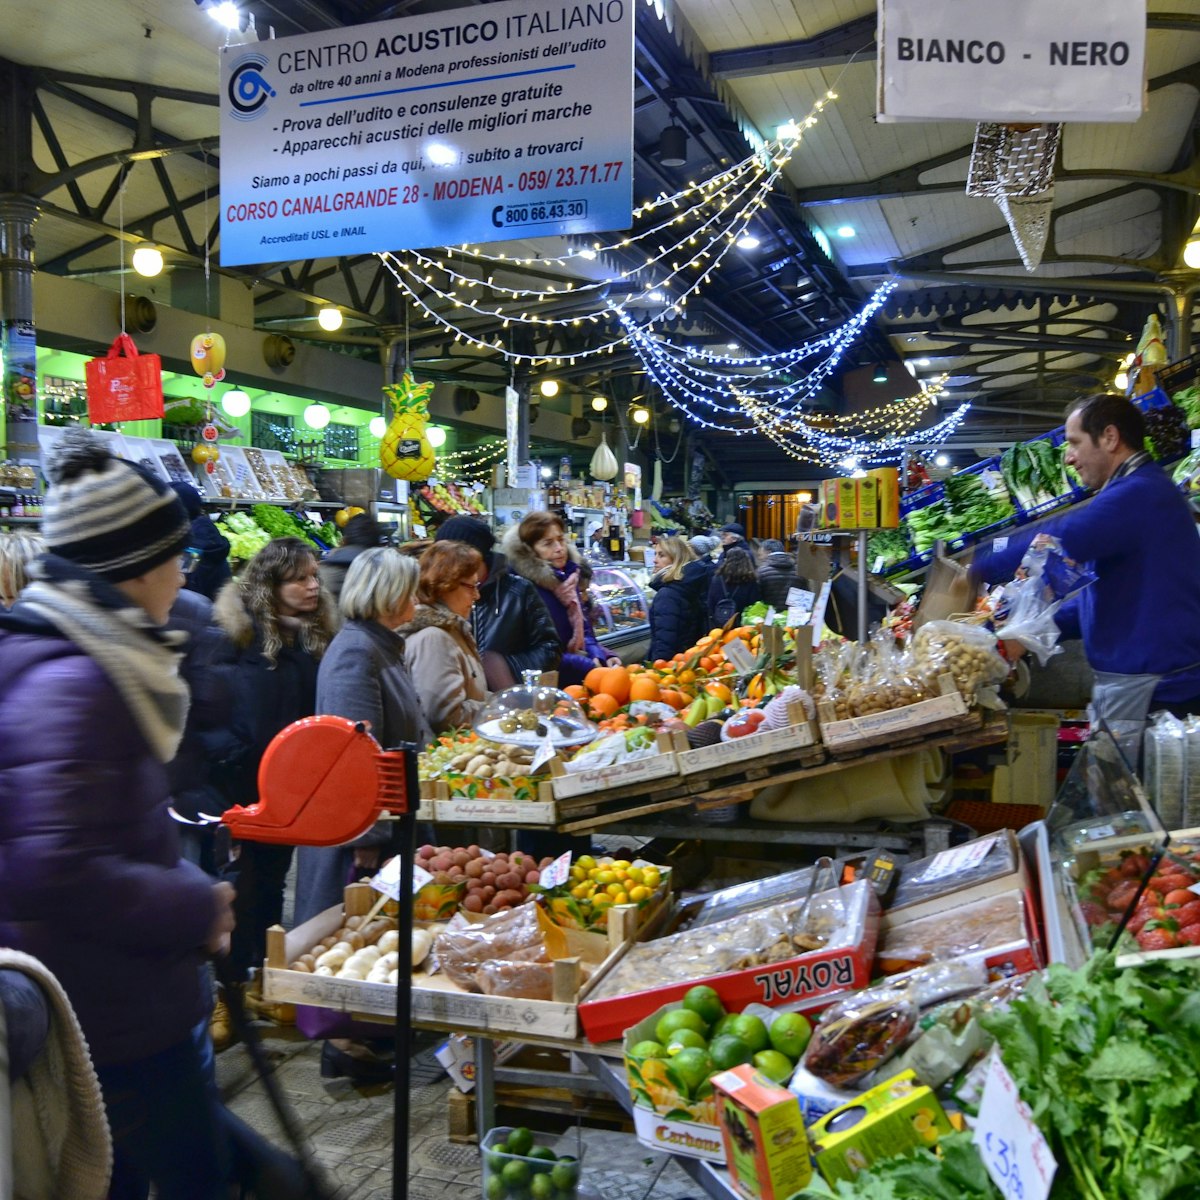 Modena, Emilia Romagna, Italy. December 2018. Interior of the Albinelli market, the historical market of the city. In addition to fruits and vegetables there are local gastronomic specialties
1126663769
people, freshness, city, red, fruit, store, vegetable, table, organic, ready-to-eat, tradition, gourmet, meal, food, bread, yellow, snack, selling, ham, tomato, pasta, packaging, merchandise, backgrounds, exhibition, italy, modena, albinelli
